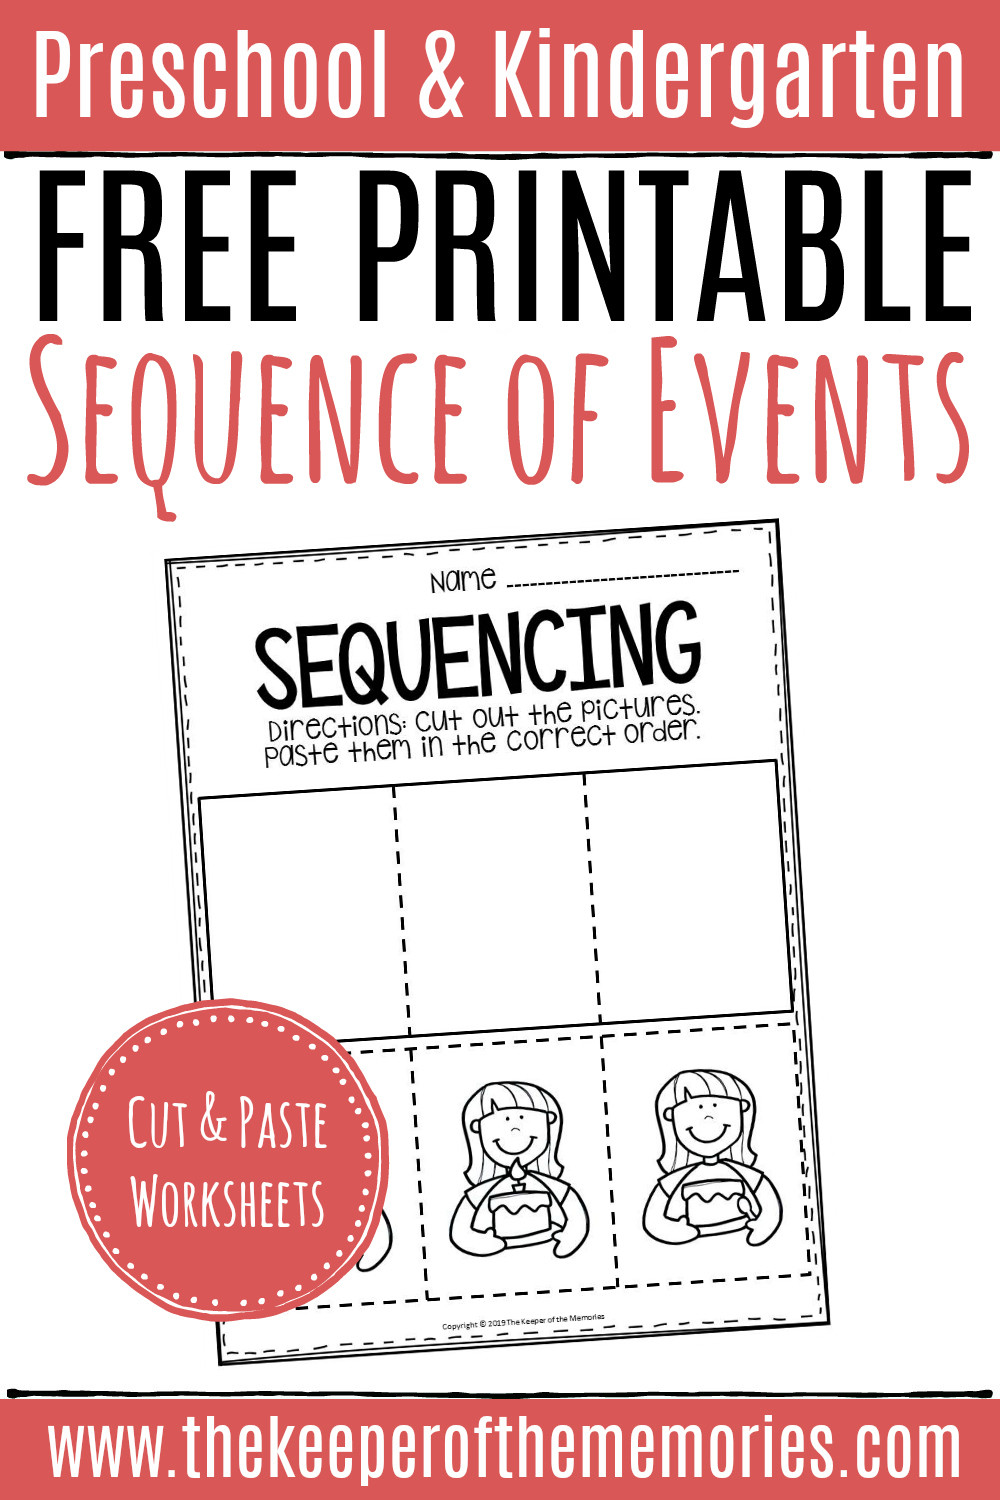 Printable Sequencing Worksheets Free Printable Sequence Of events Worksheets